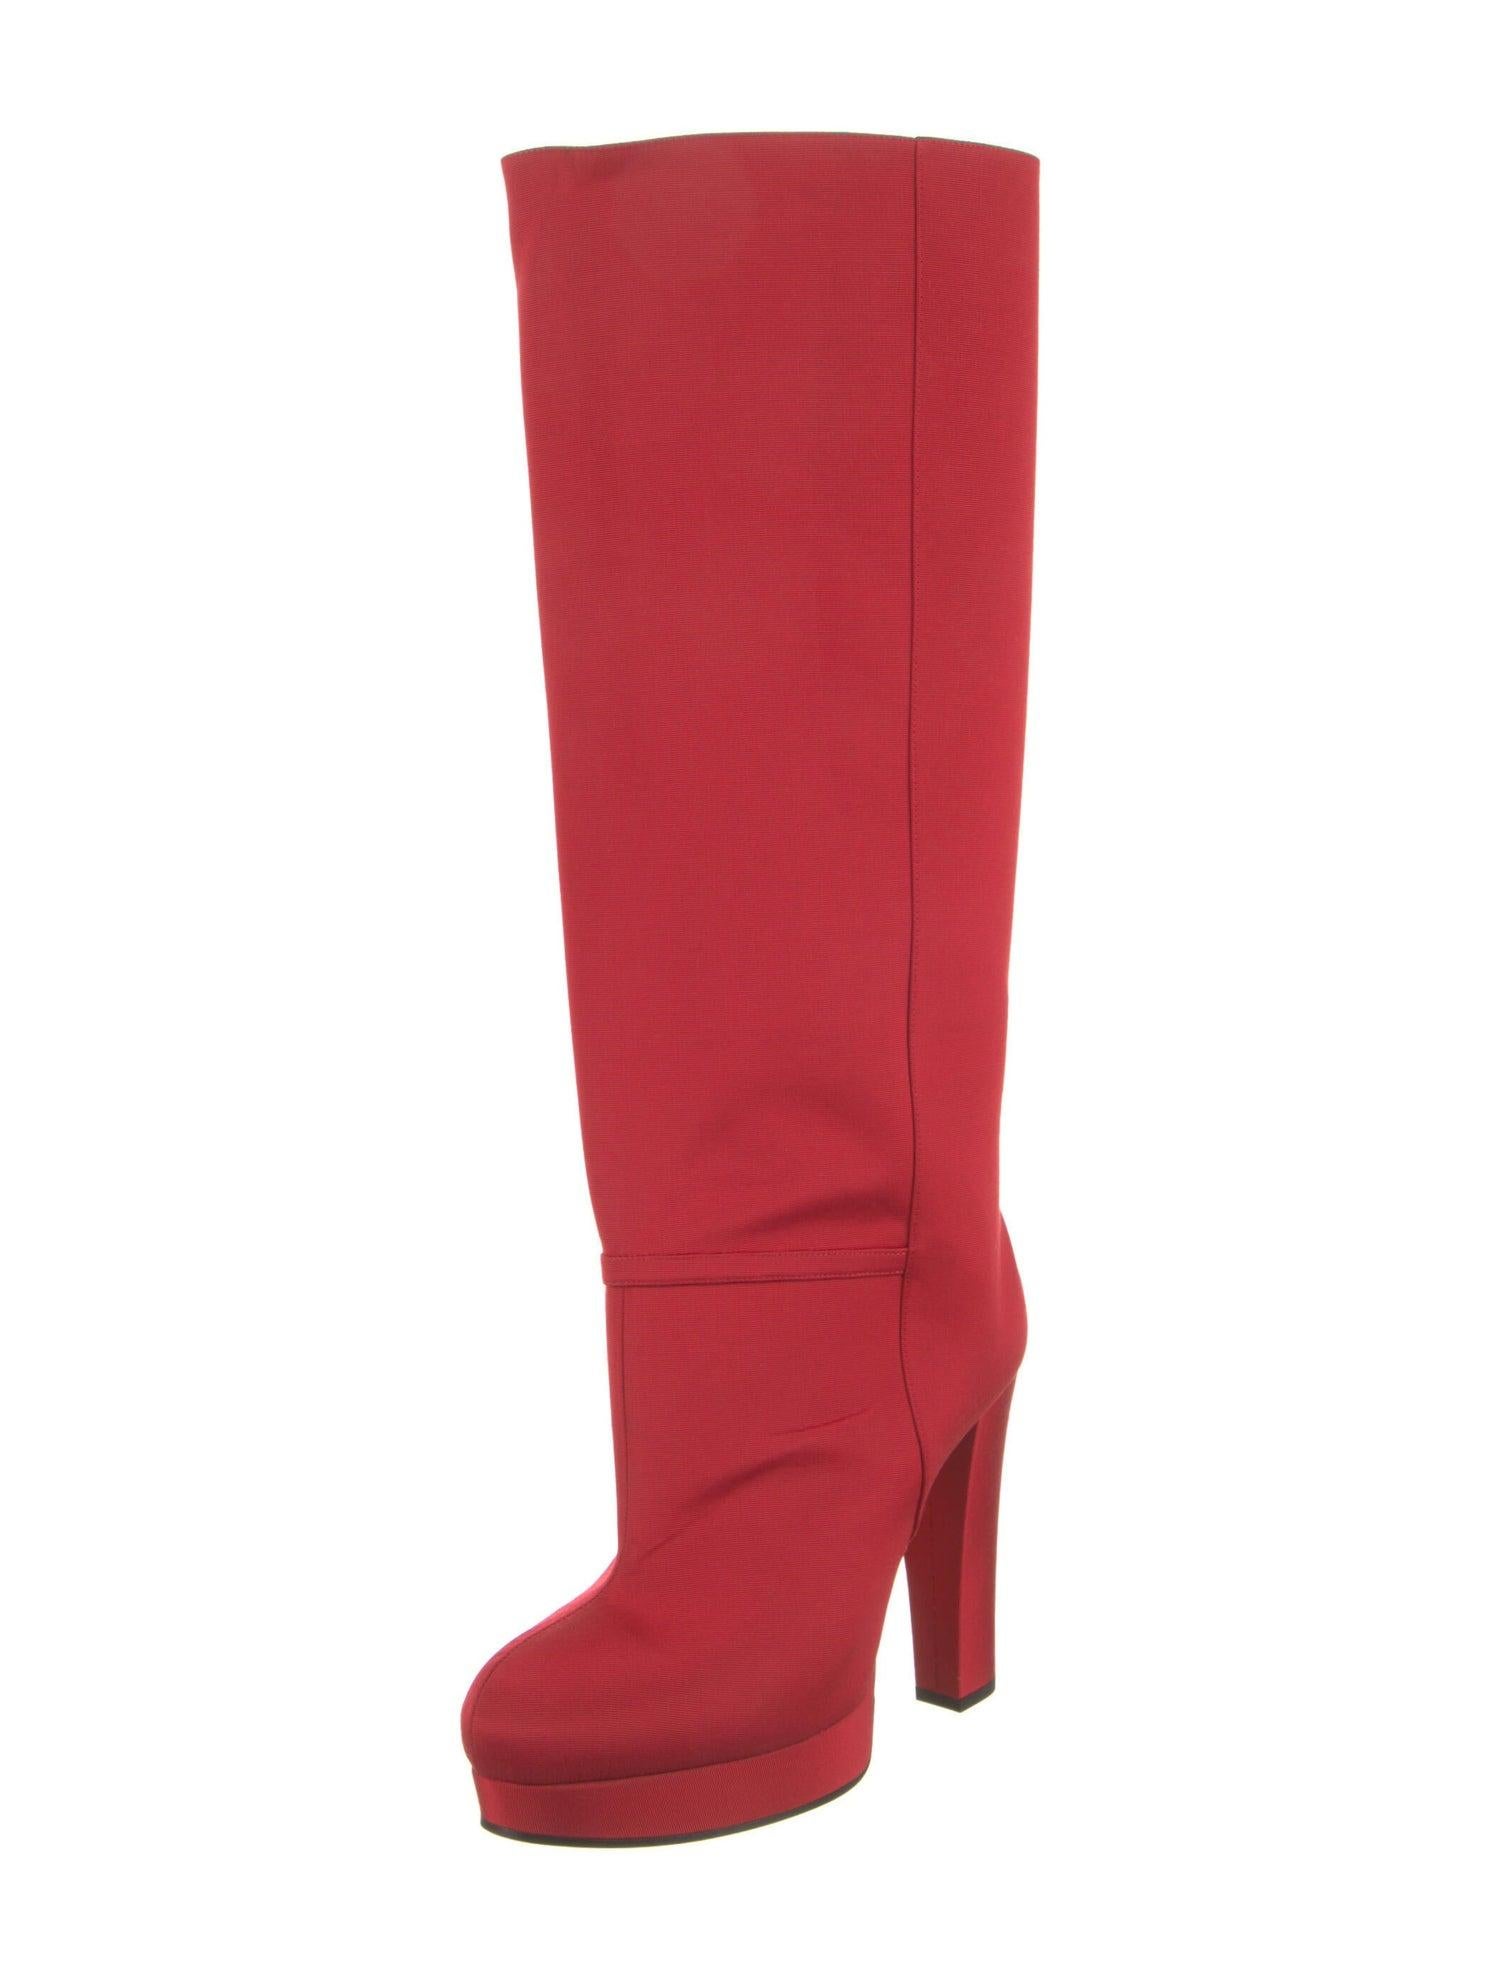 New With Box Gucci Fall 2019 Alessandro Michele Red Boots Sz 36.5 For Sale 12